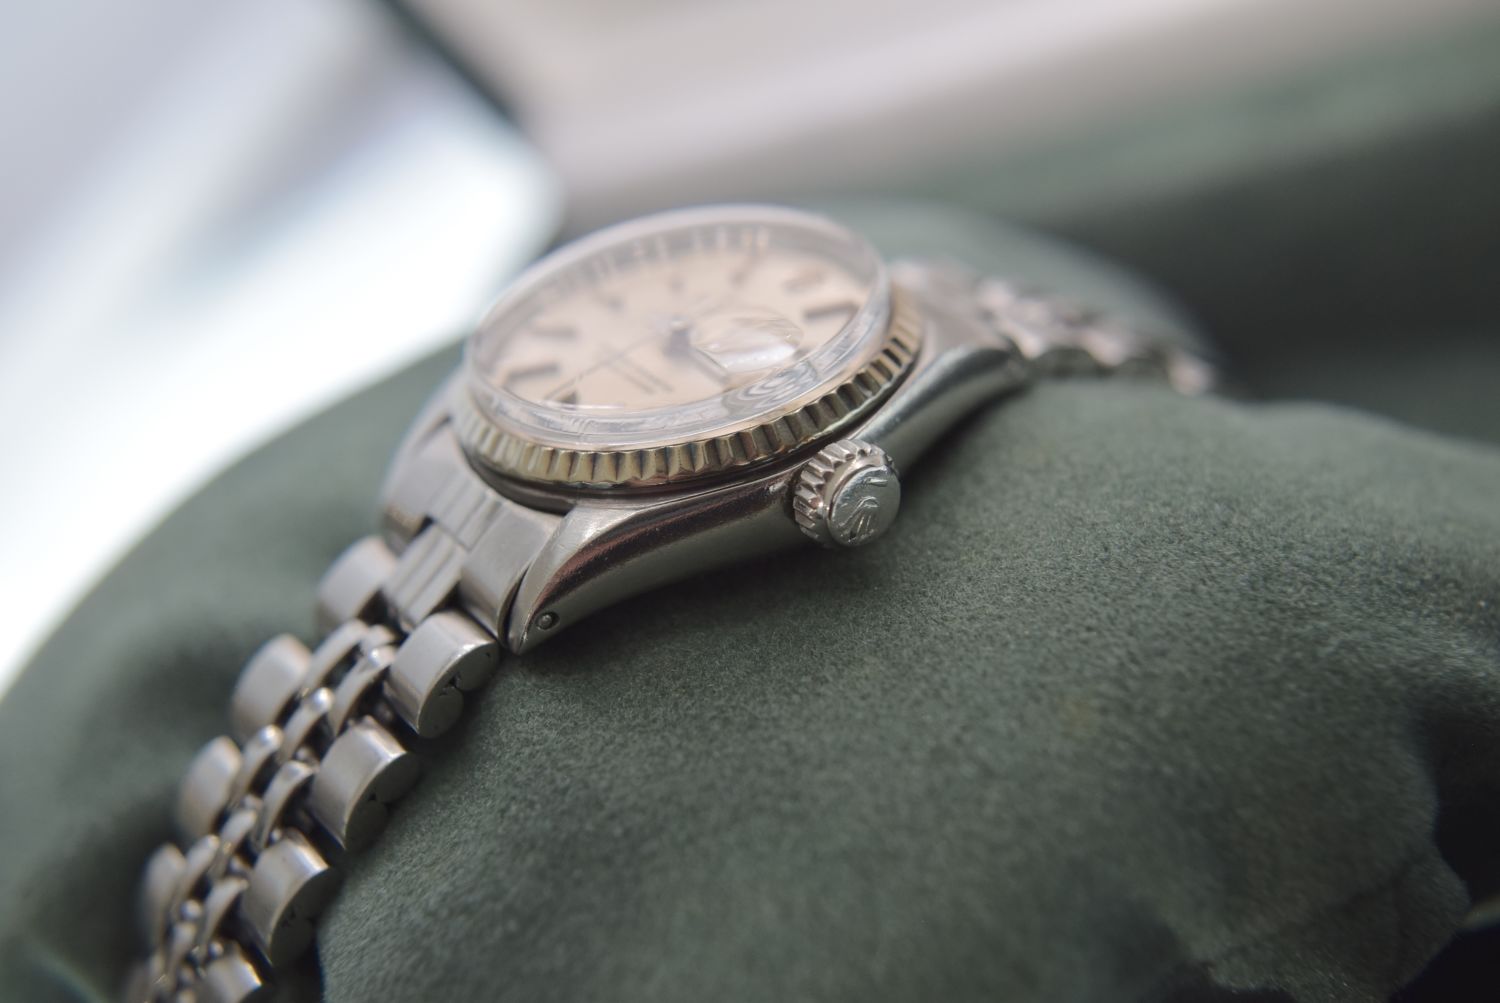 ROLEX STAINLESS STEEL DATEJUST (26MM) - Image 3 of 5